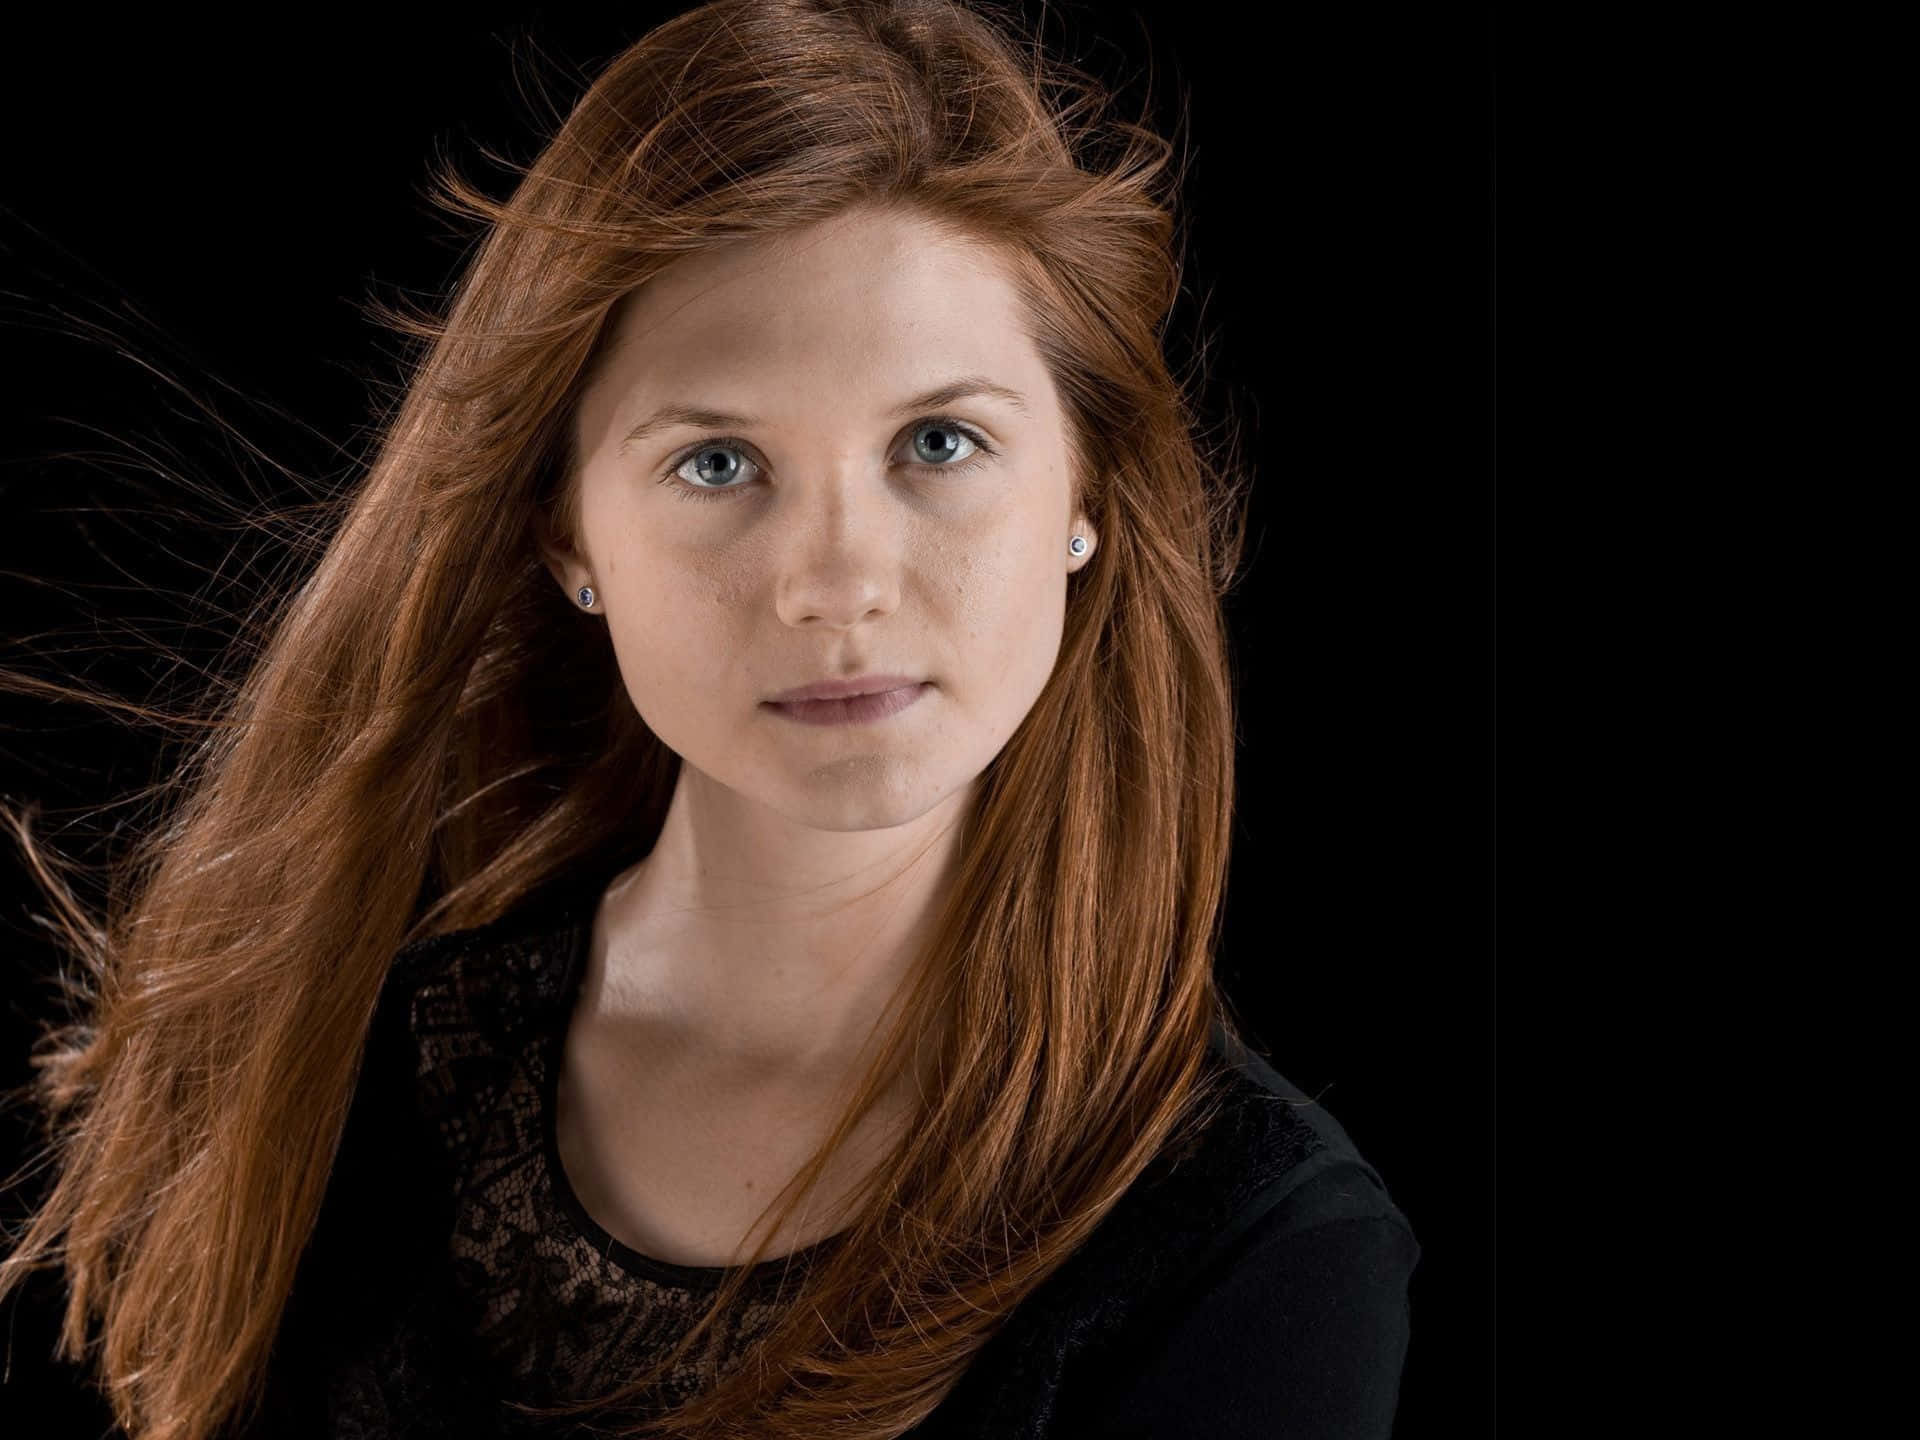 Ginny Weasley in a magical setting, casting spells Wallpaper